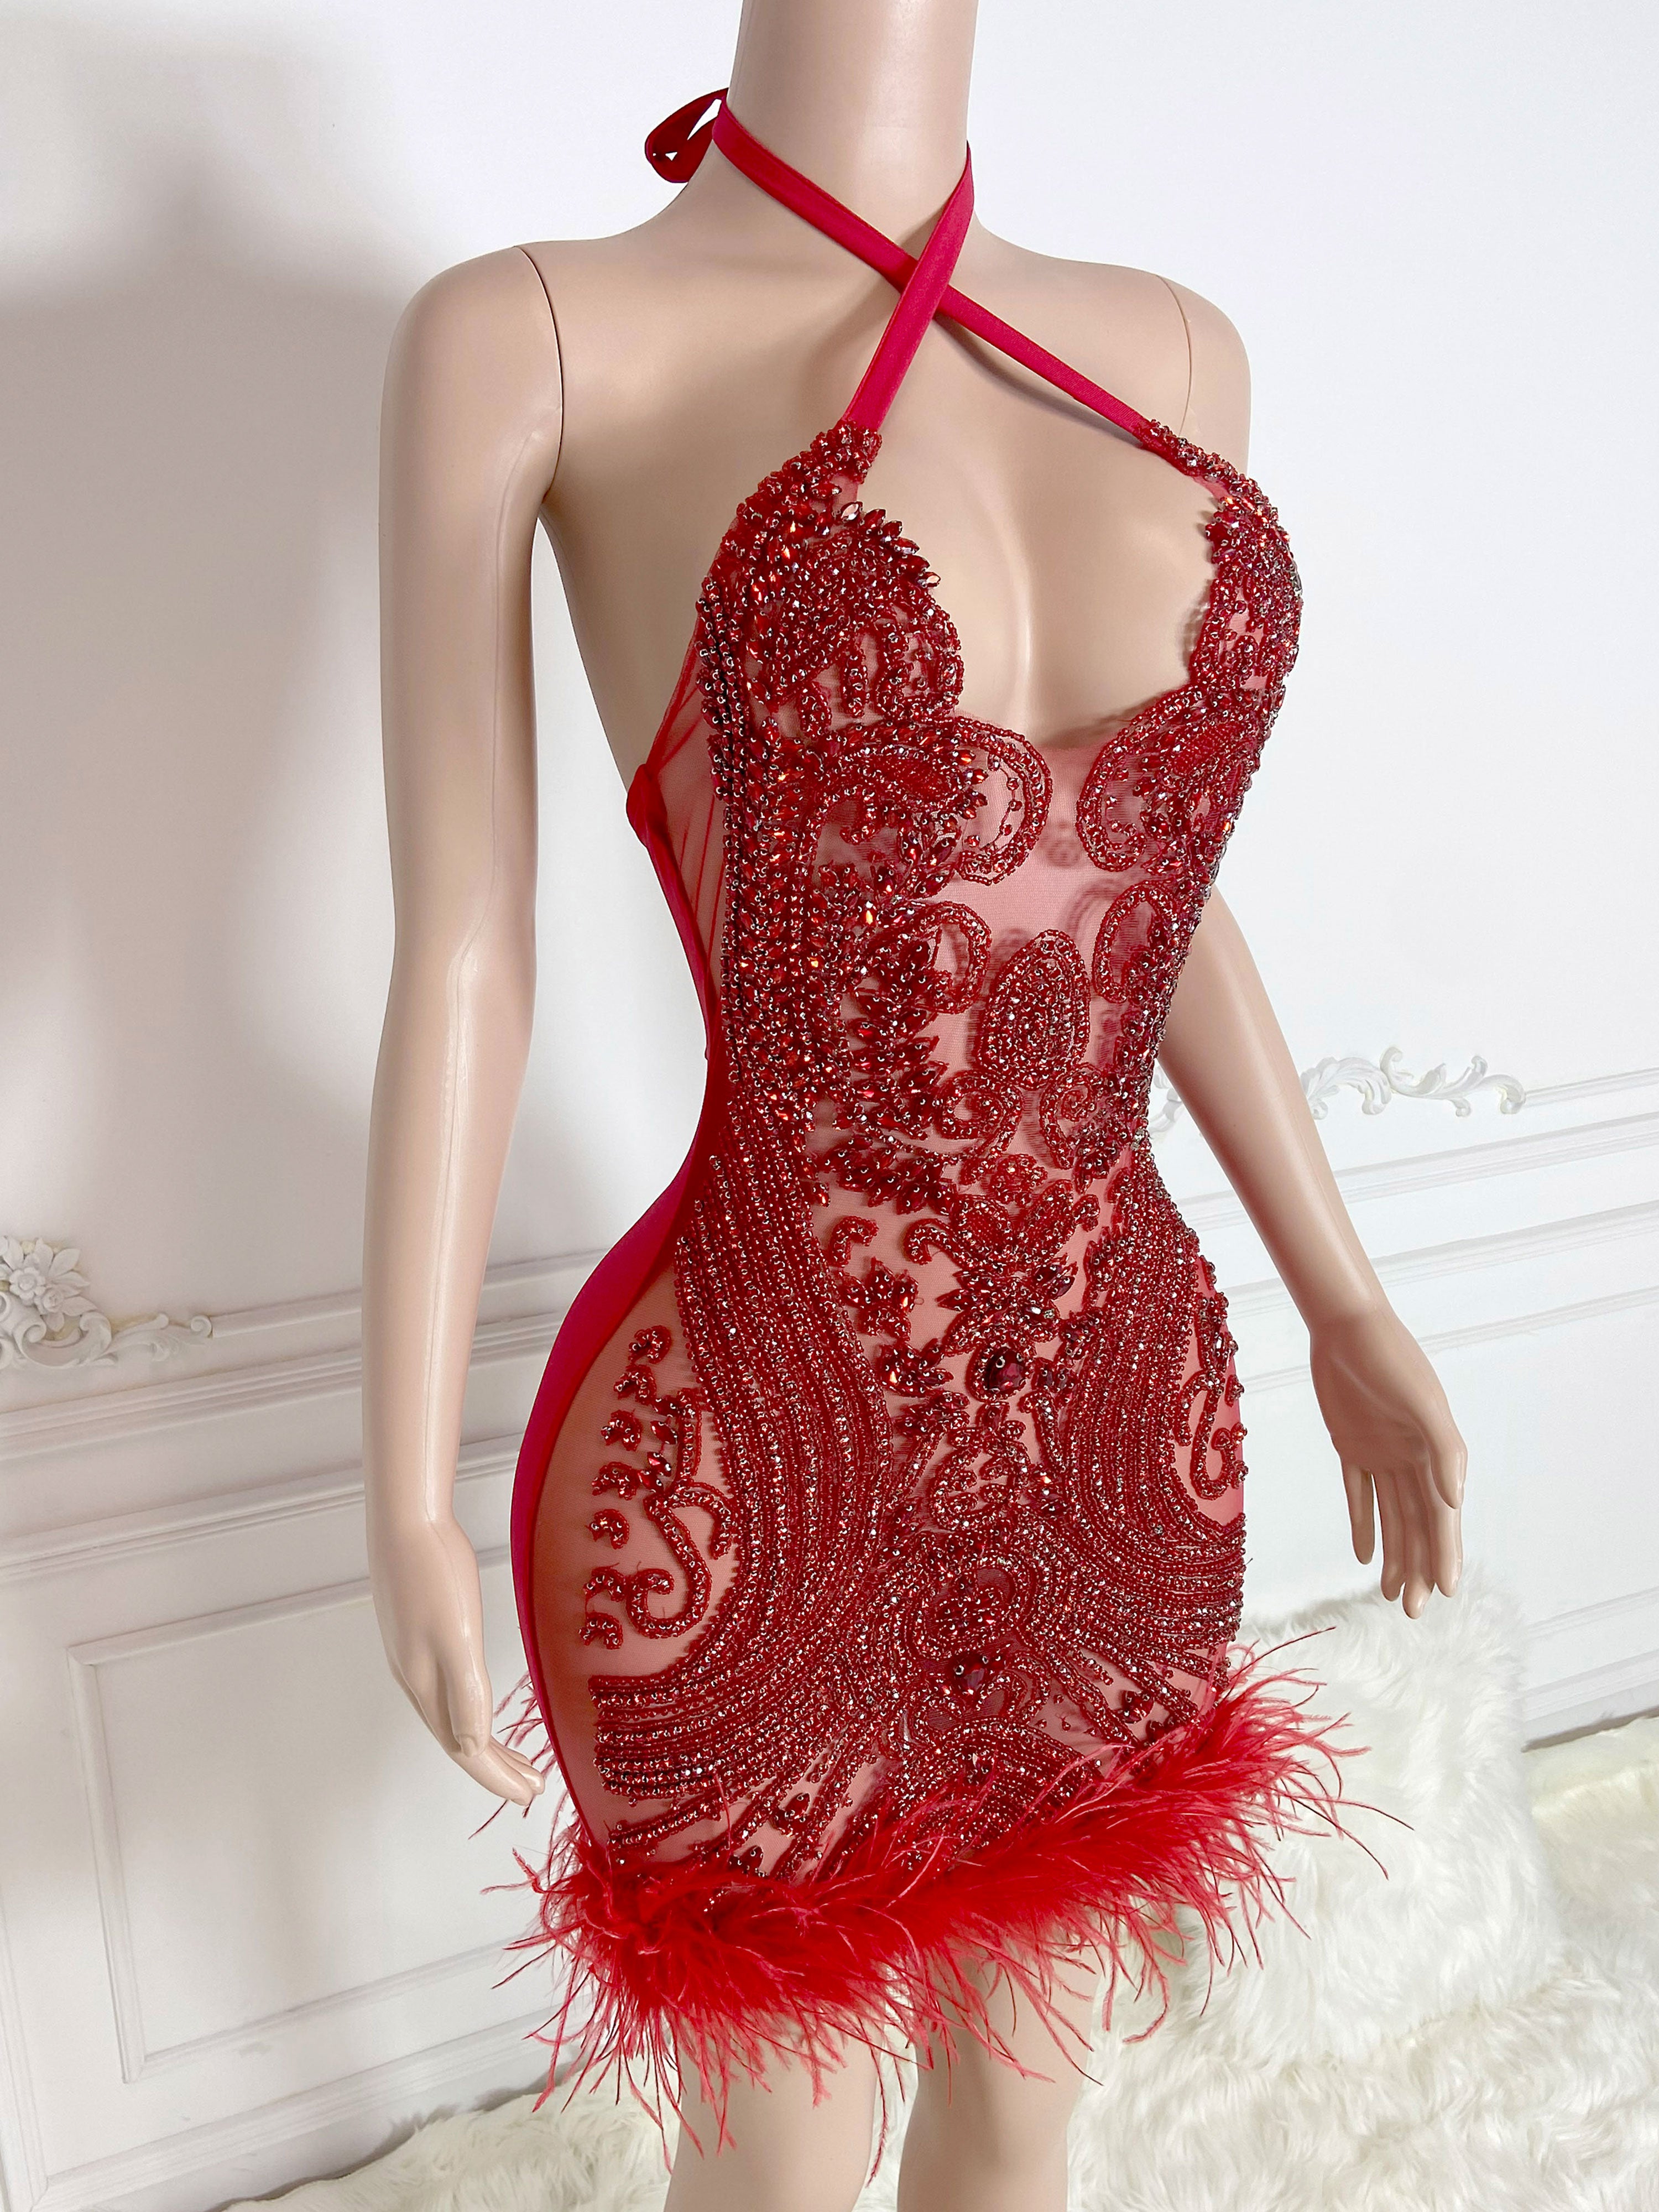 Fiery Red Feathered Halter Mini Dress